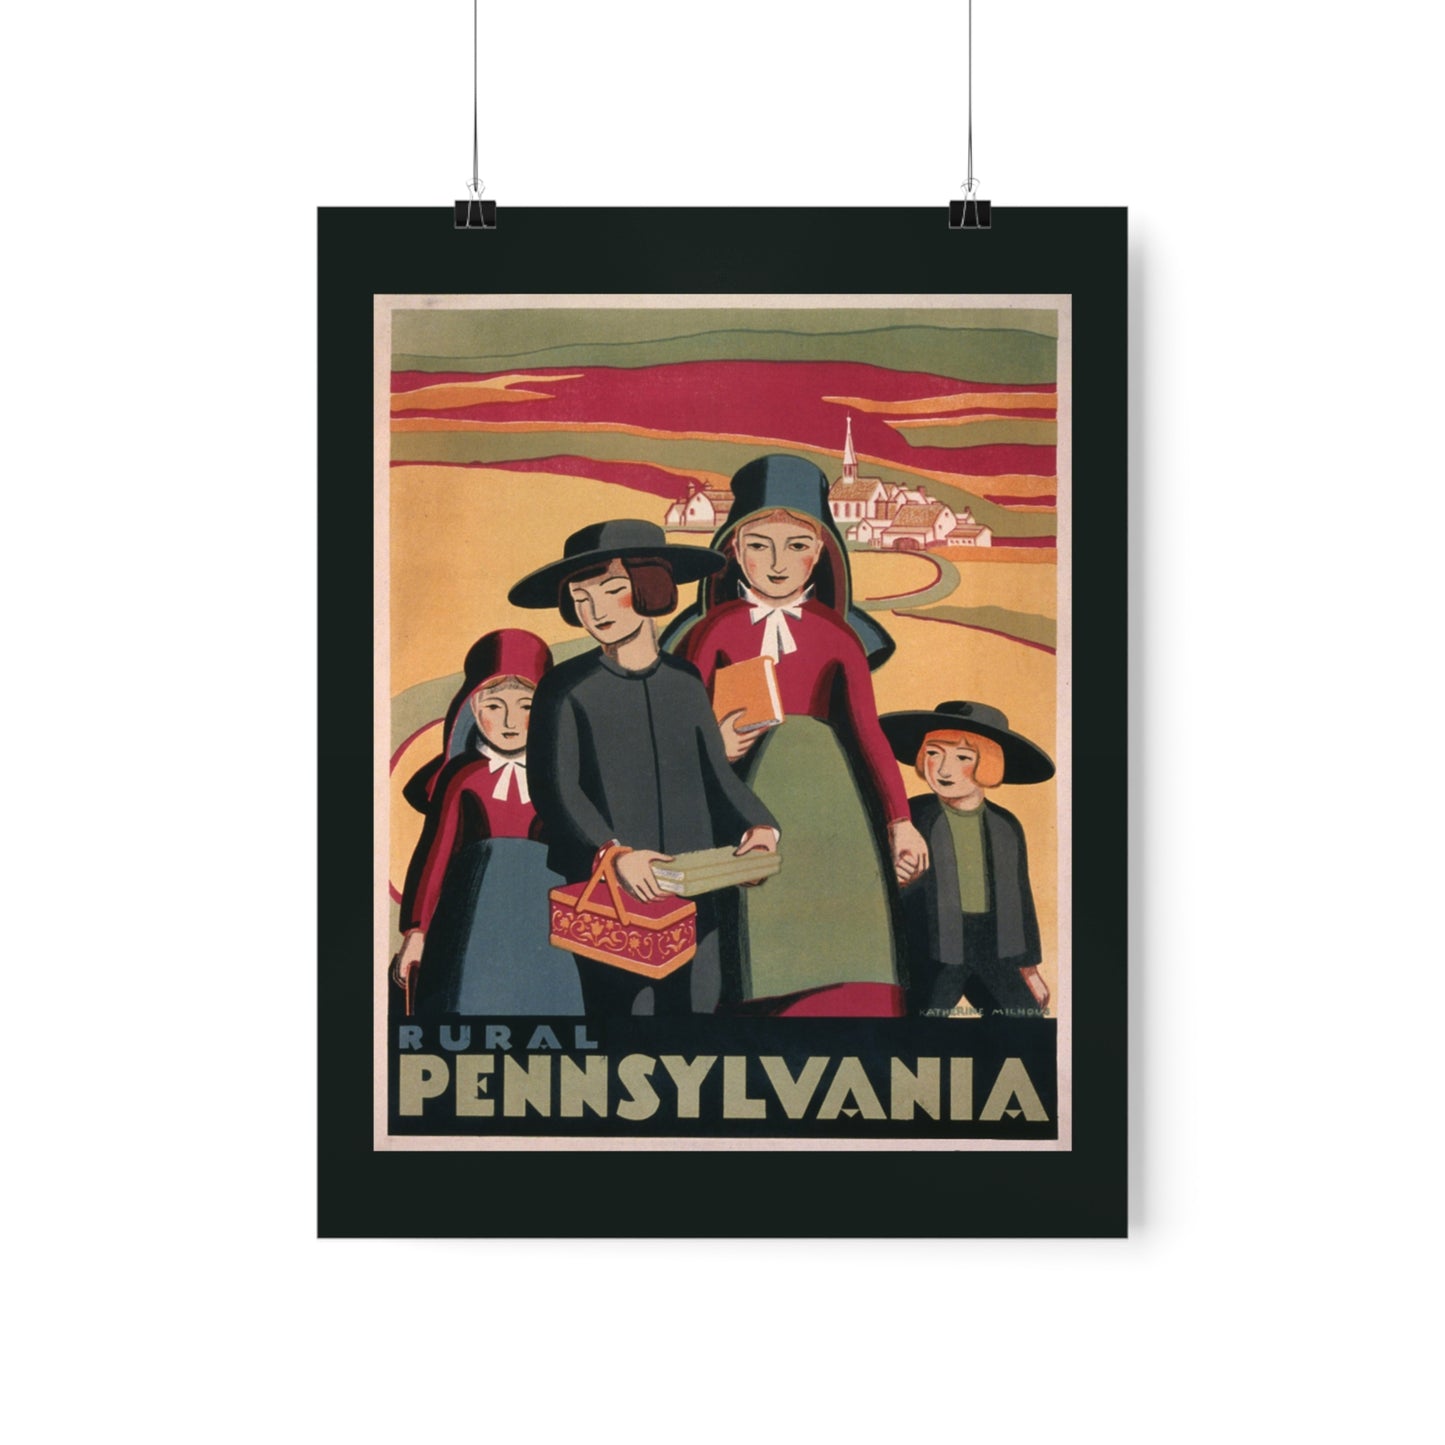 Vintage poster of Amish children and the words "Rural Pennsylvania", paying tribute to Pennsylvania Dutch heritage.